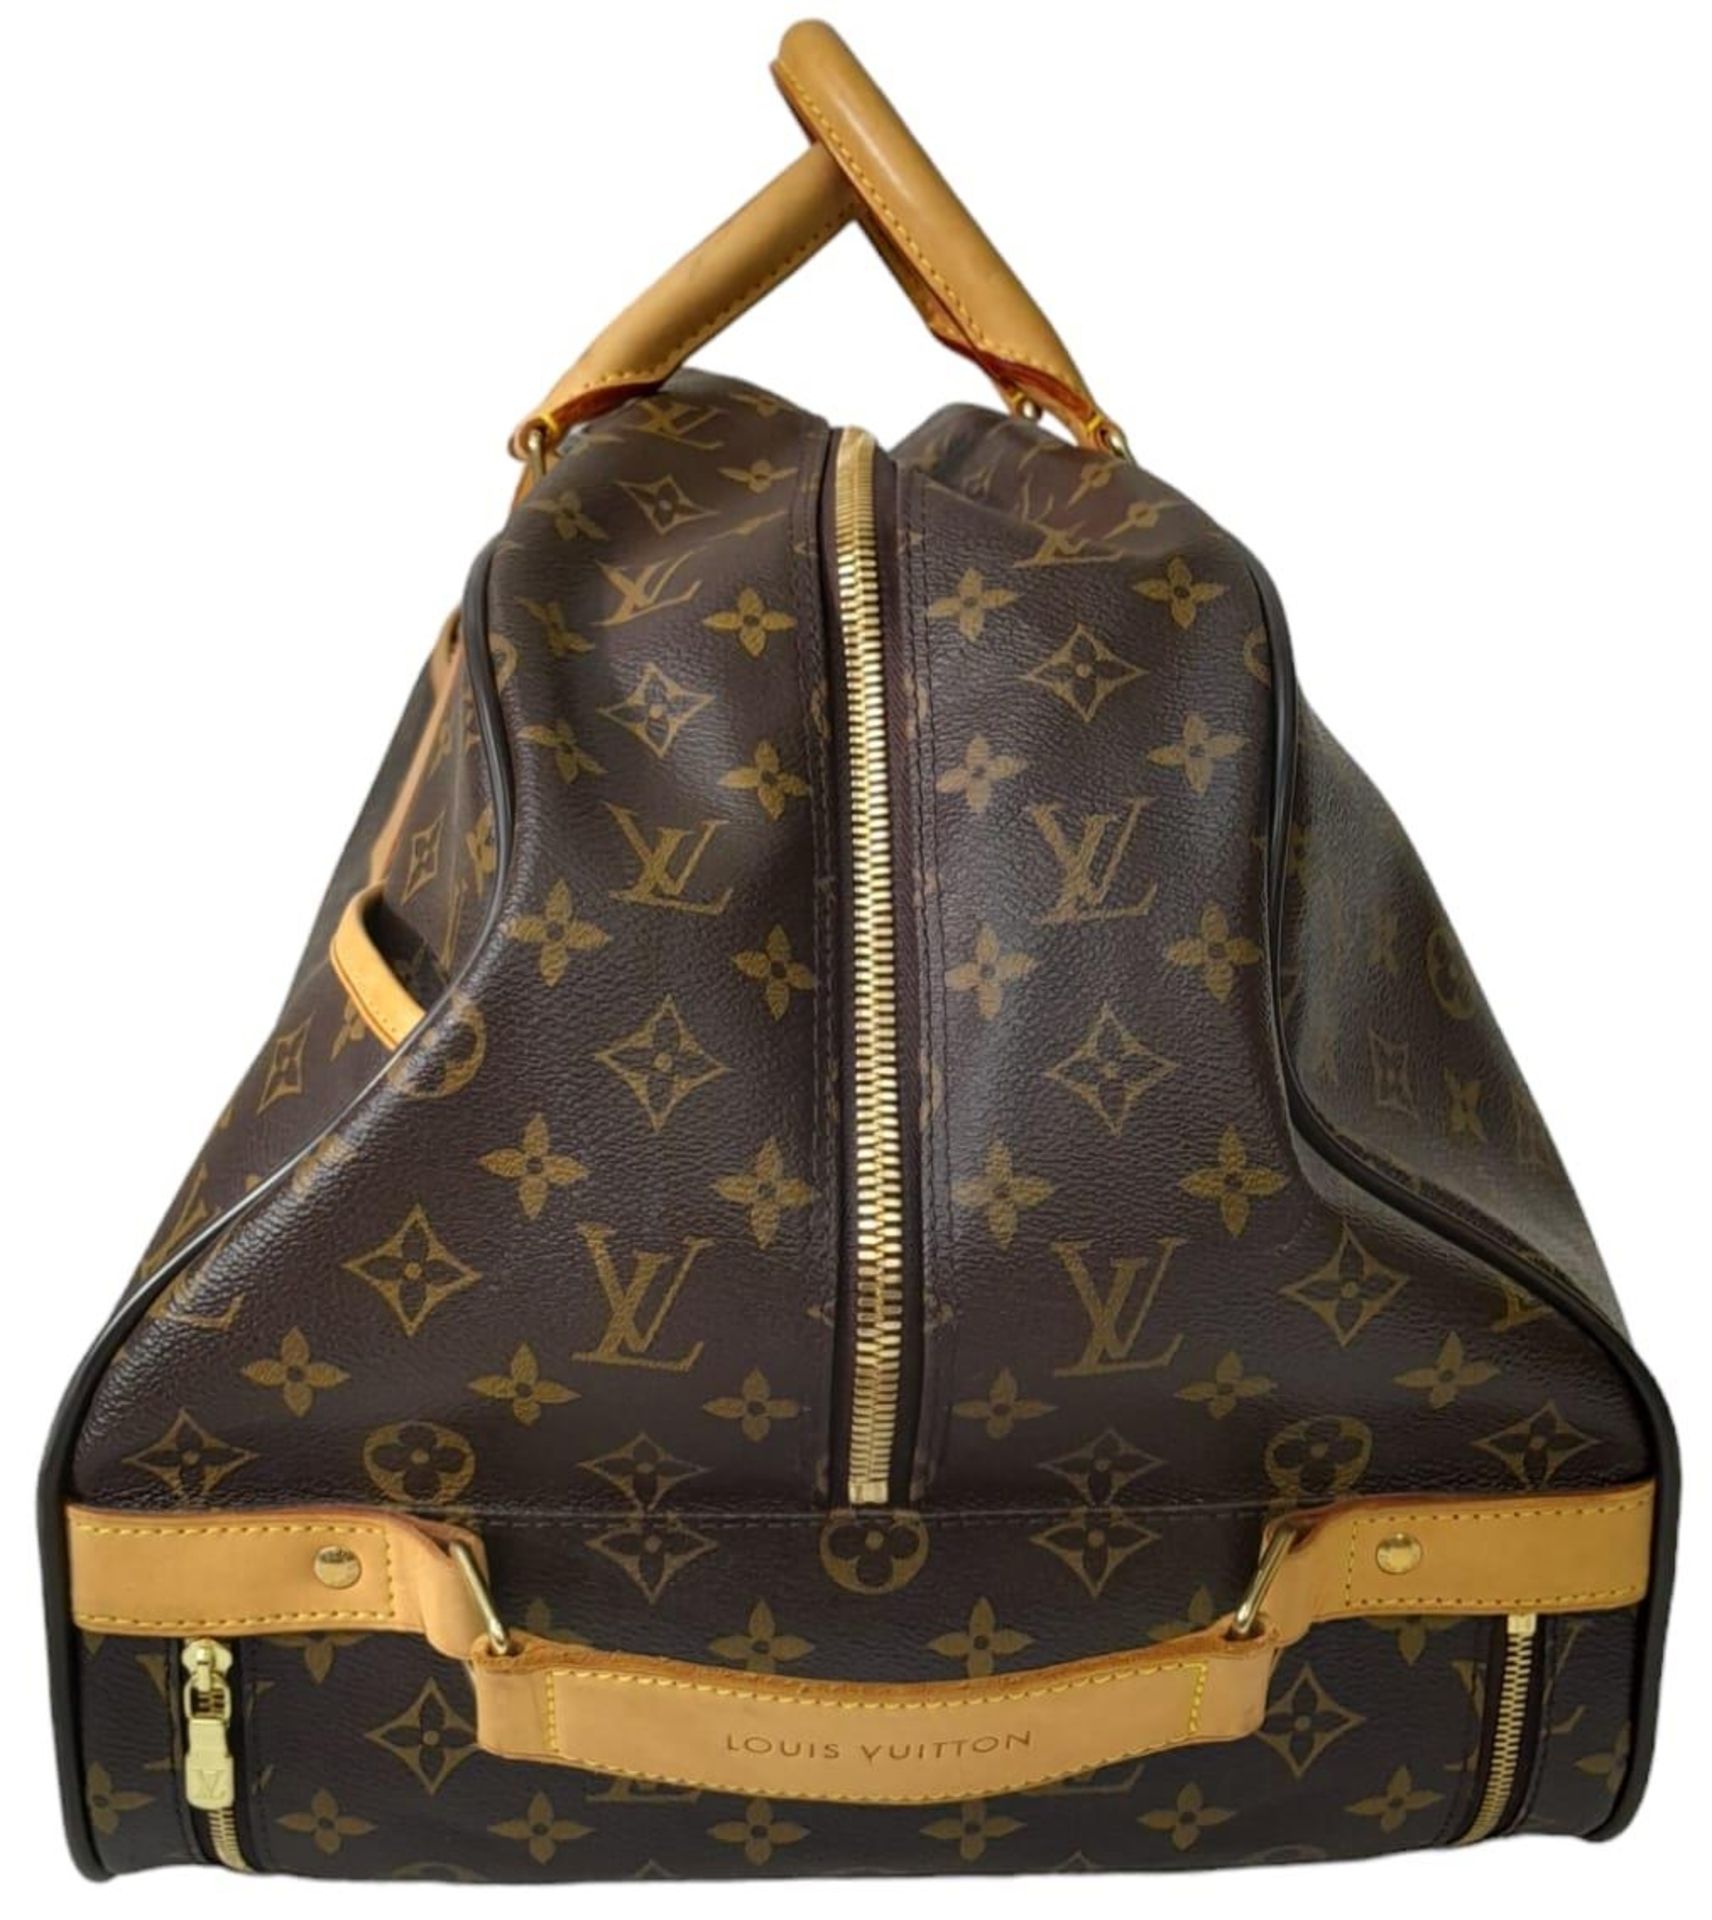 A Louis Vuitton Monogram Eole Convertible Travel Bag. Leather exterior with gold-toned hardware, - Image 3 of 11